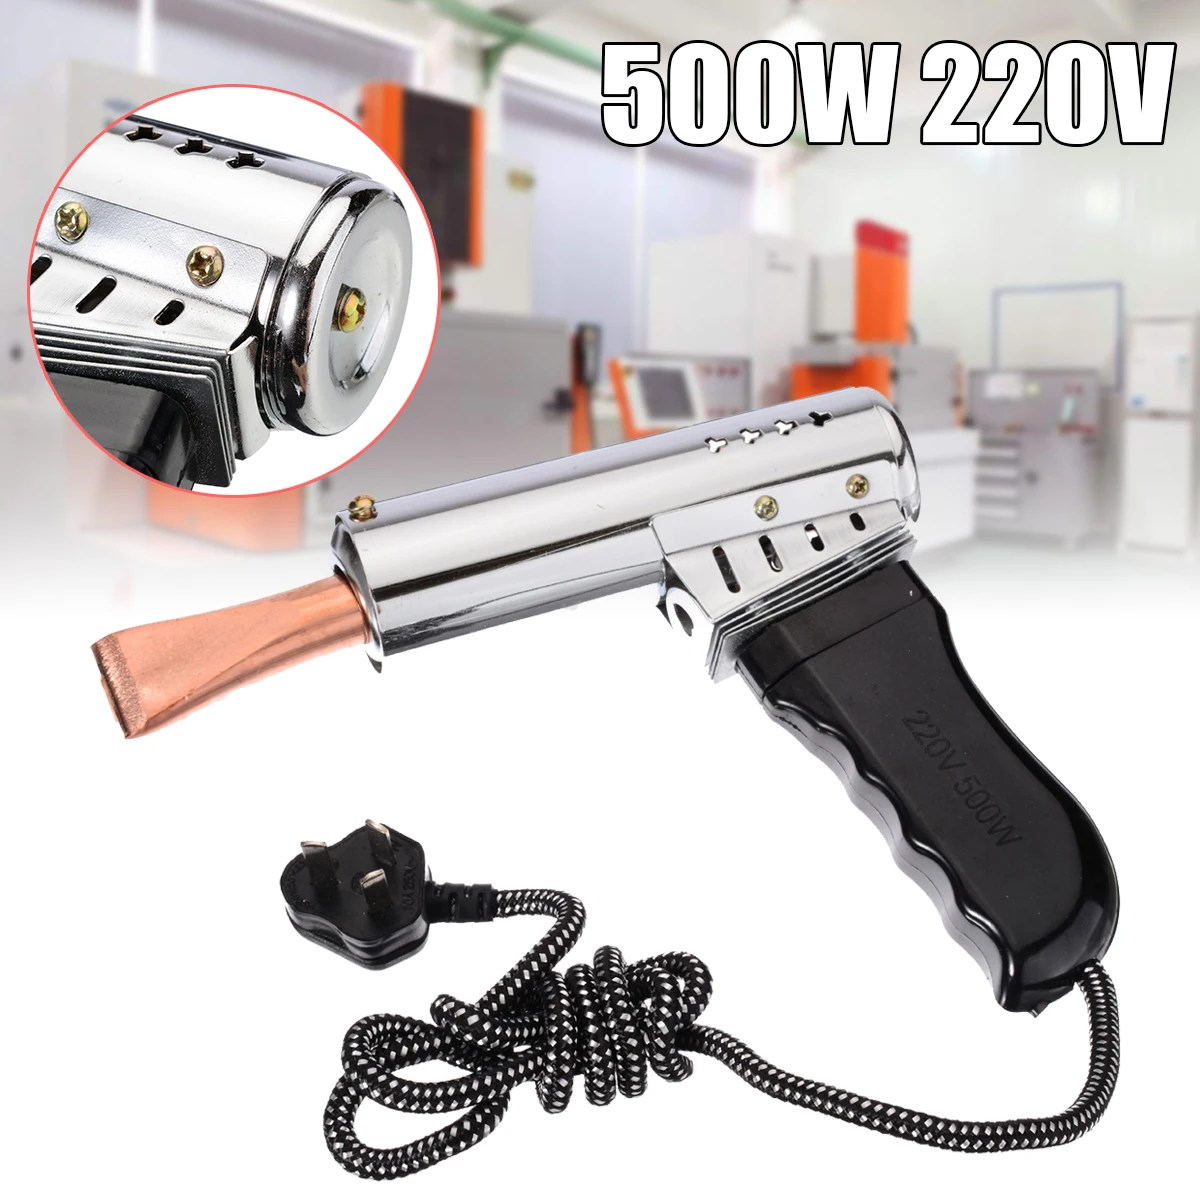 500W Electric Soldering Hot Gun Iron Heavy Duty High Power Chisel Tip Soldering Craft Manufacturing Copper Tip Solder Tool